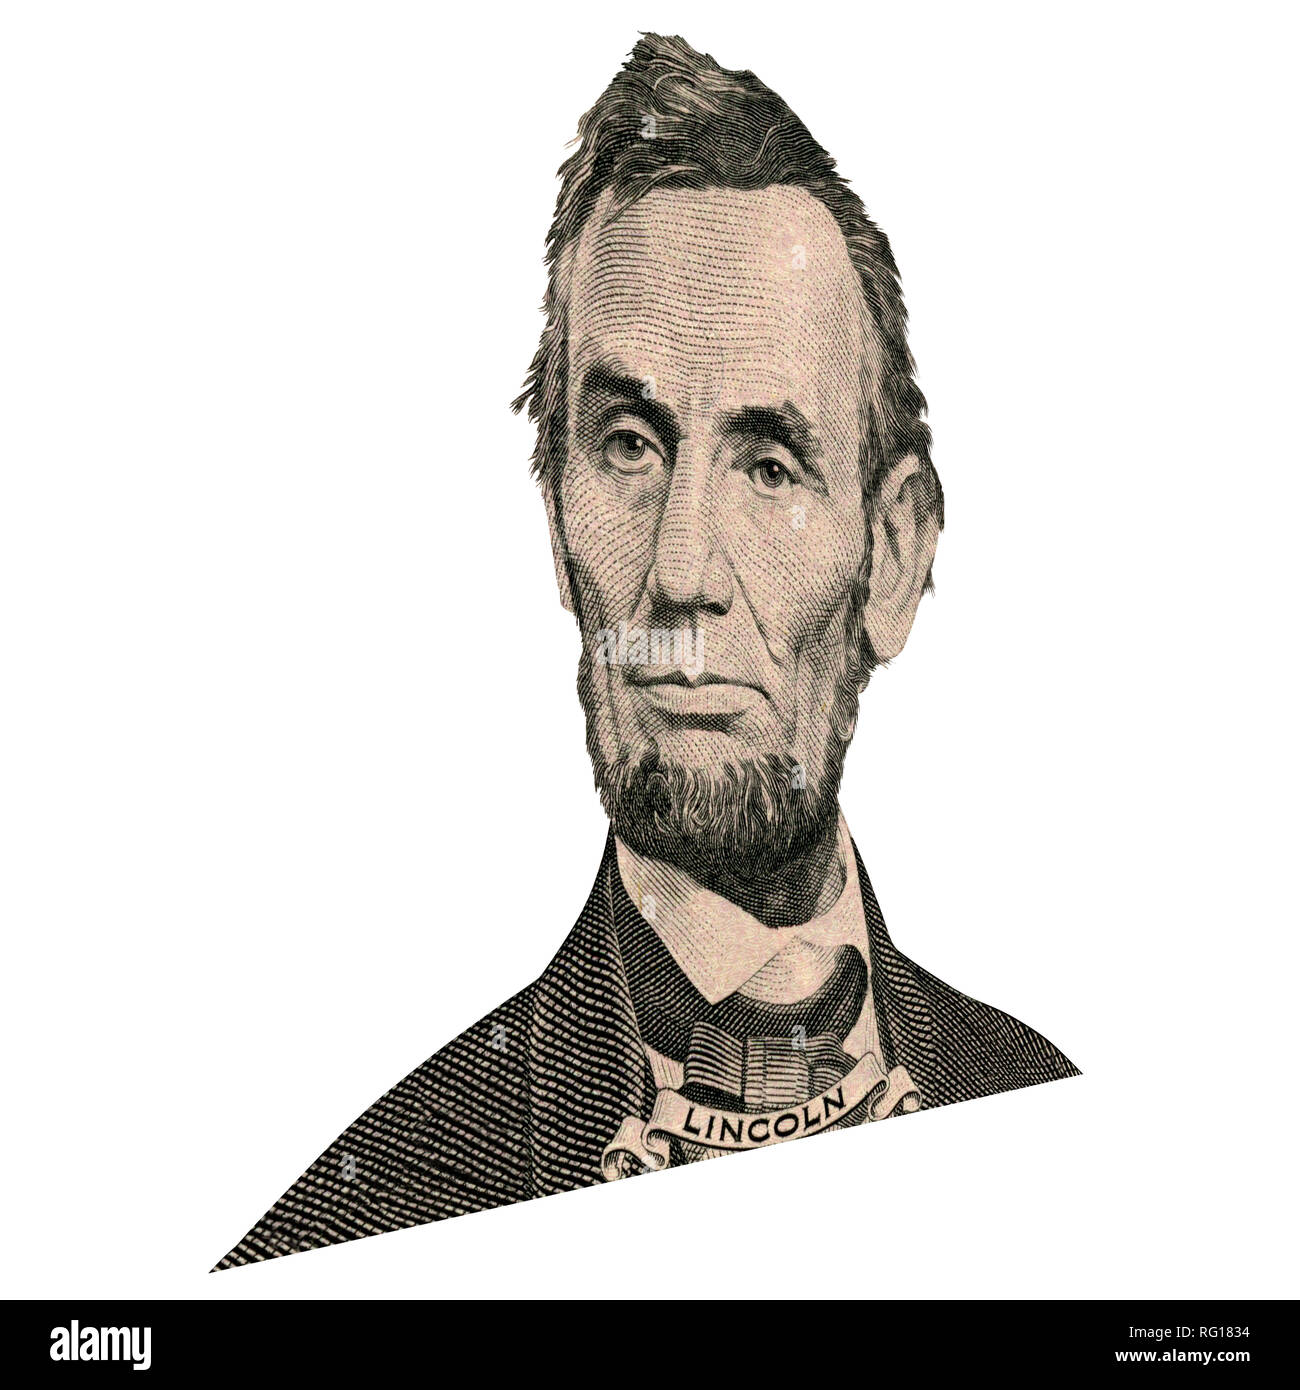 Portrait of former U.S. president Abraham Lincoln as he looks on five dollar bill obverse. Photo at an angle of 15 degrees. Stock Photo